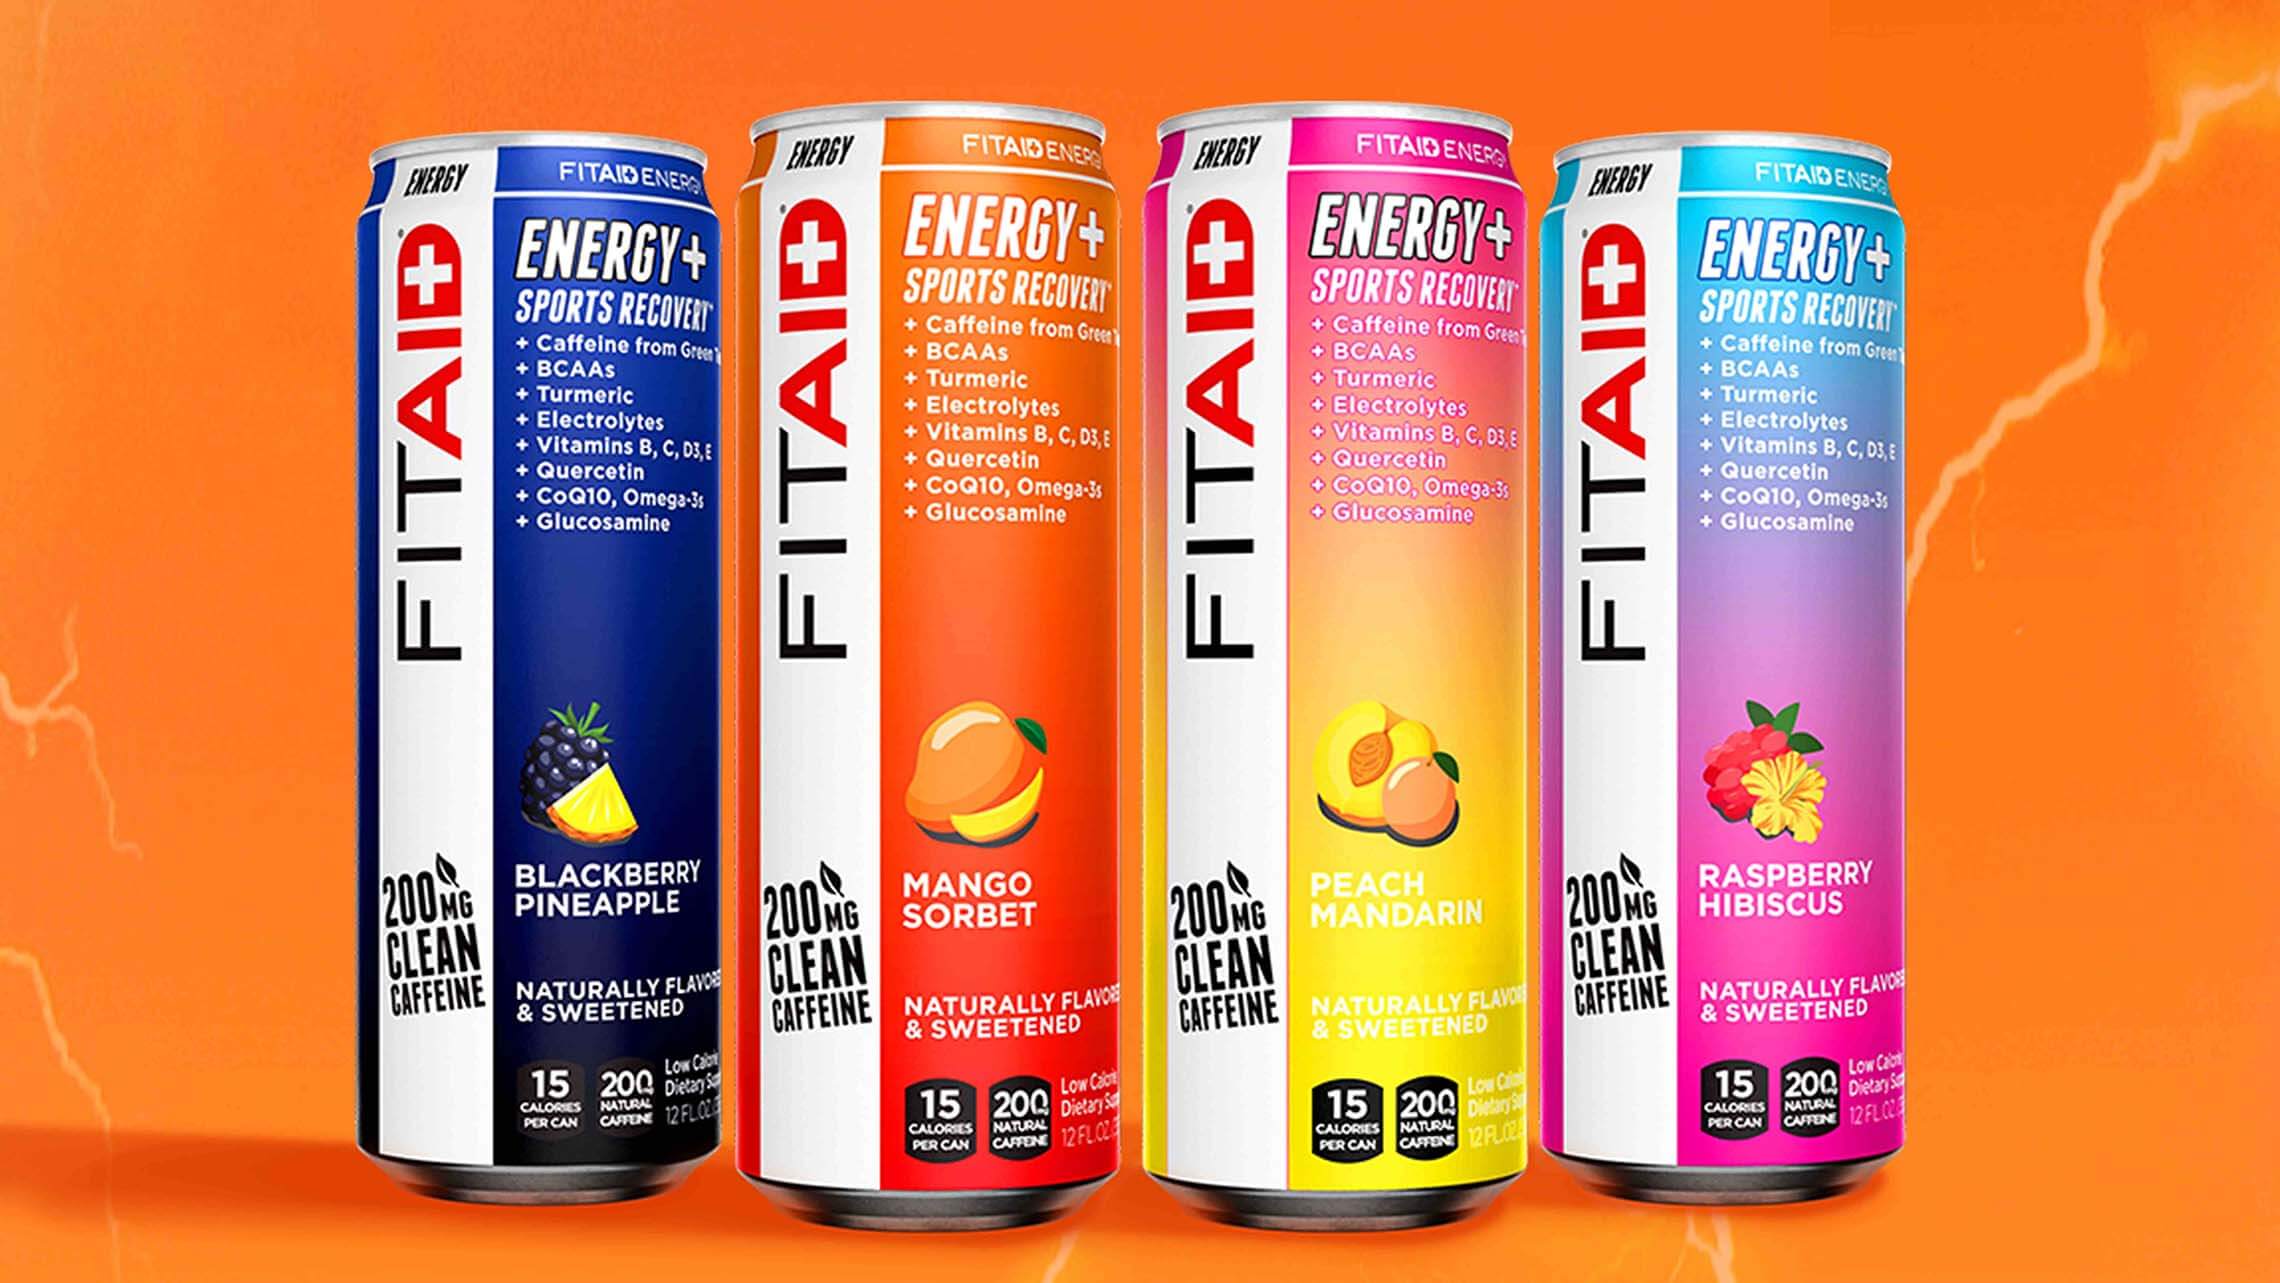 Four FITAID Energy Cans